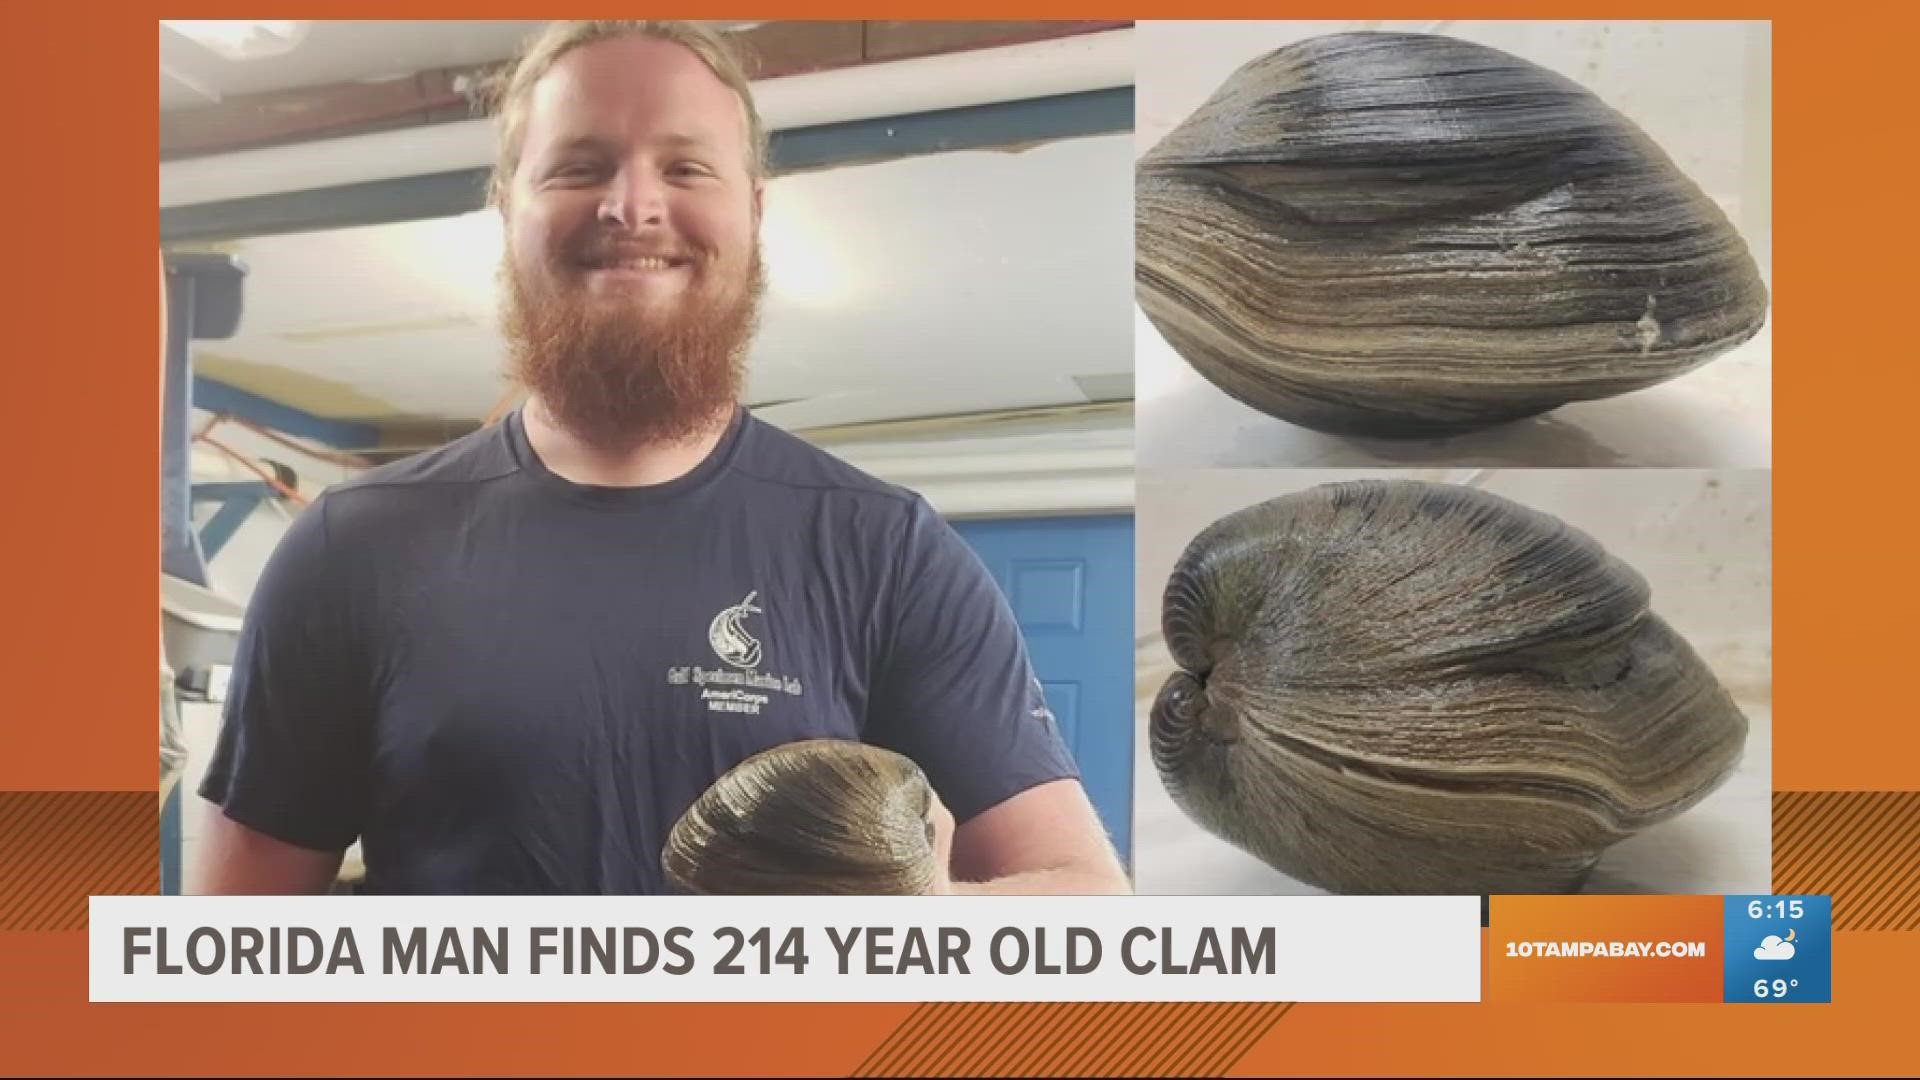 The clam, which was named "Aber-clam Lincoln," measured up to 6 inches and 2.6 pounds.